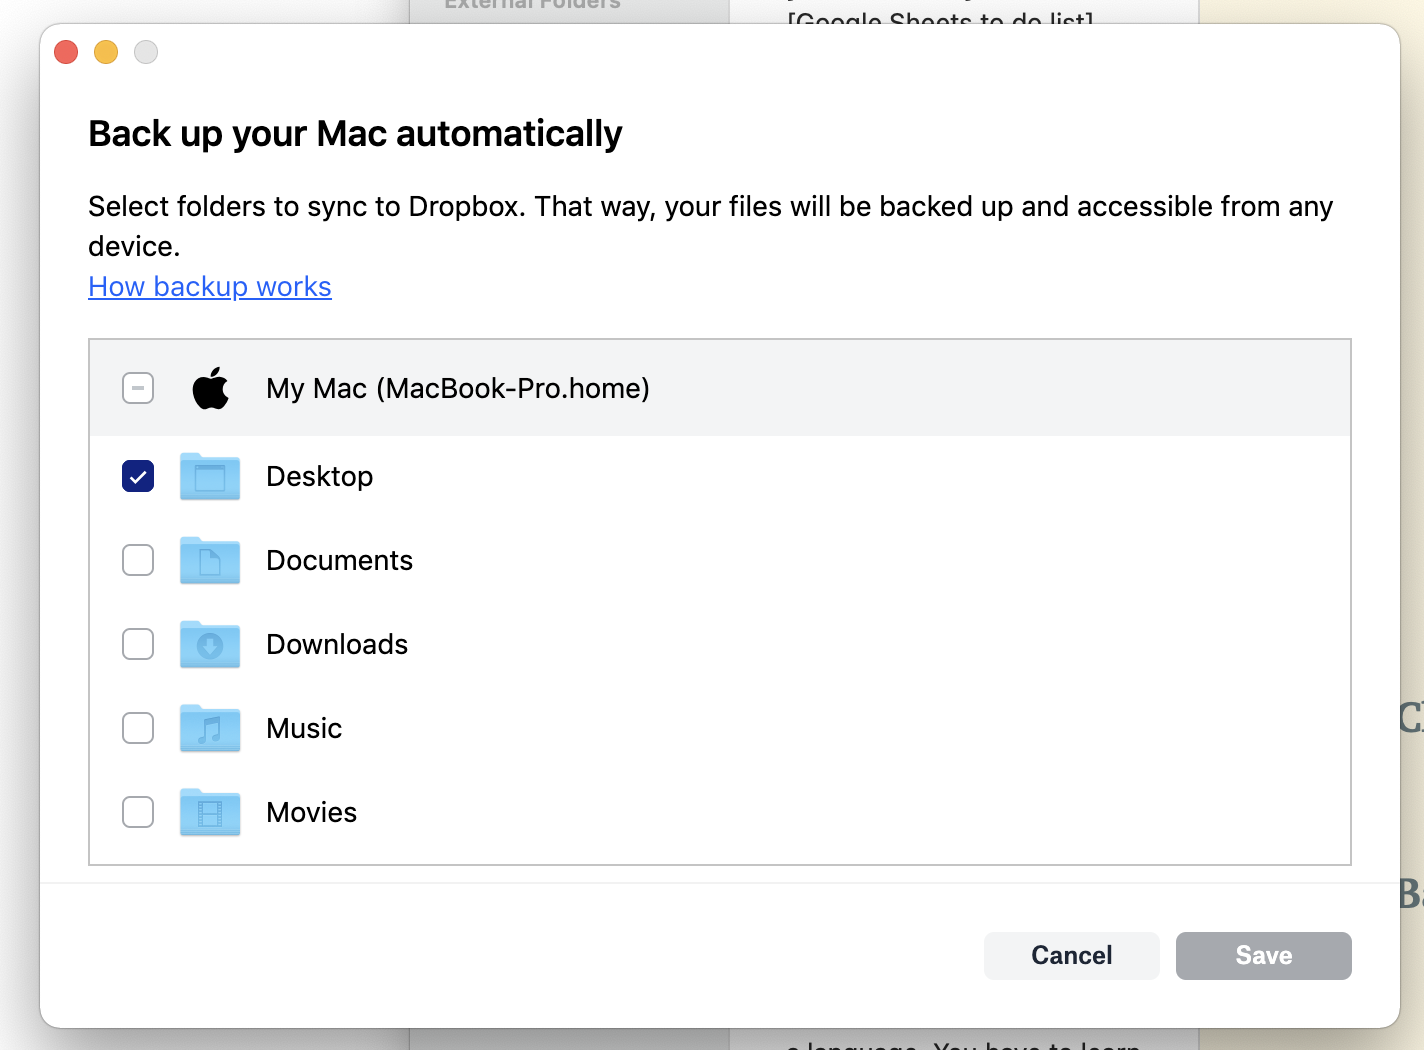 oder versions of dropbox for mac